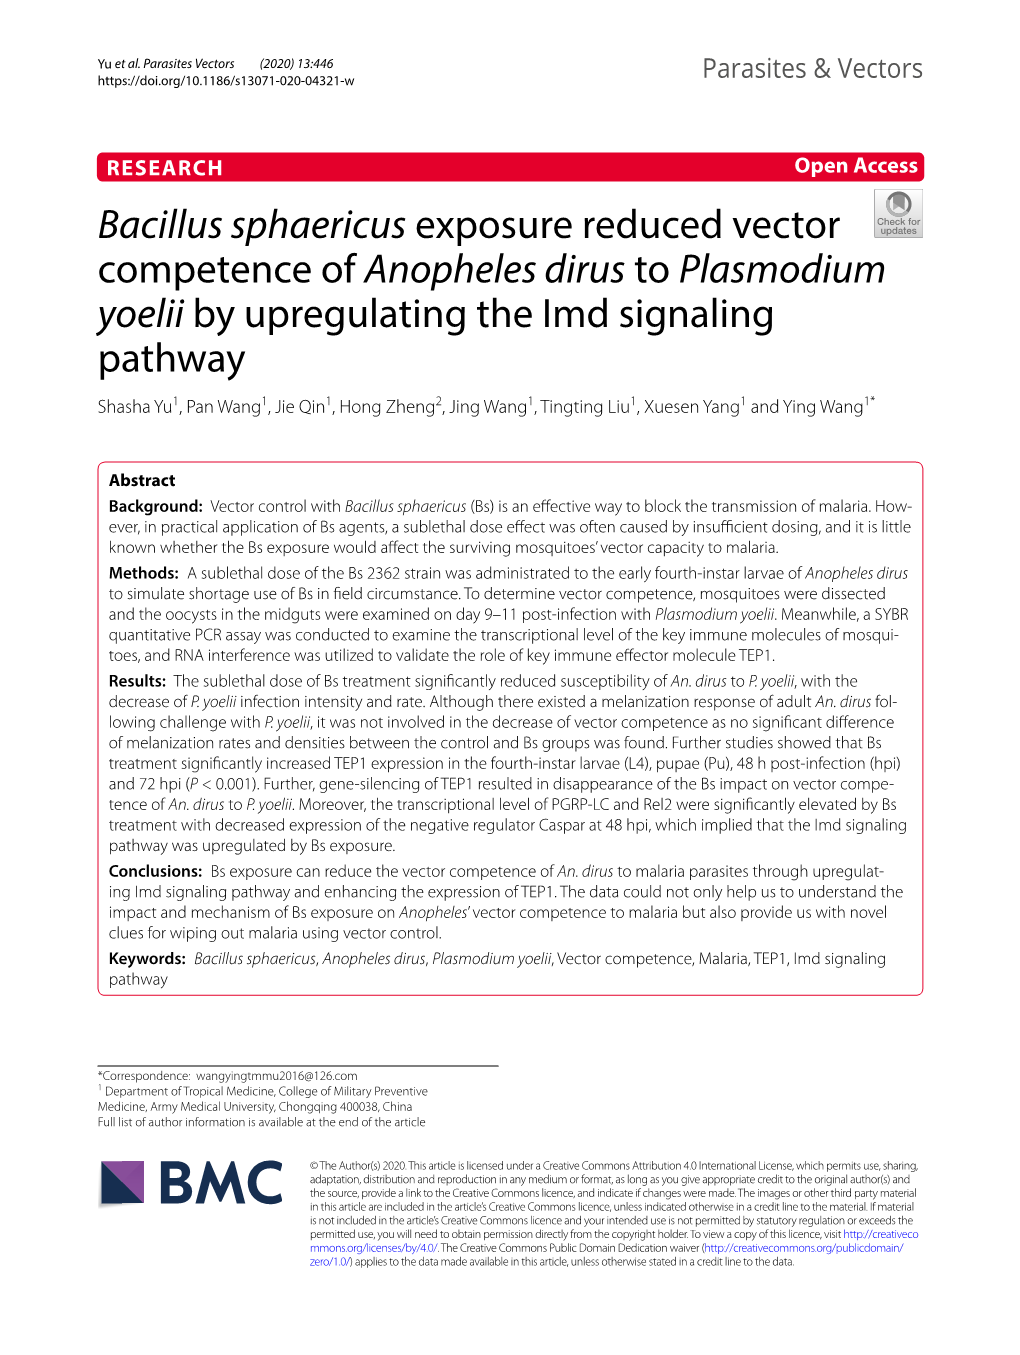 Bacillus Sphaericus Exposure Reduced Vector Competence of Anopheles